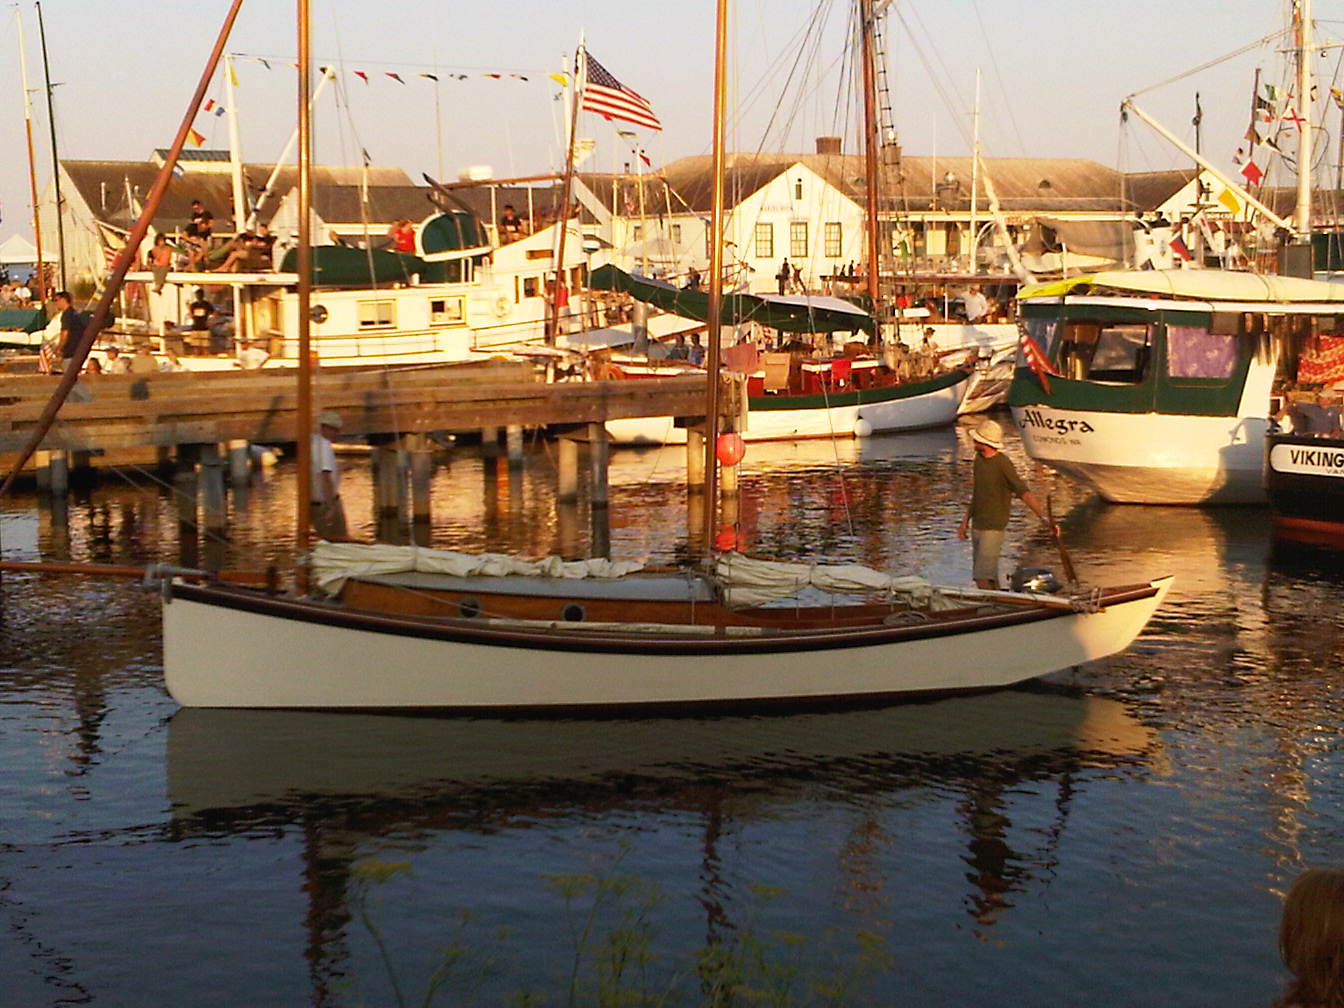 2012's wooden boat show calendar sailor's whipping